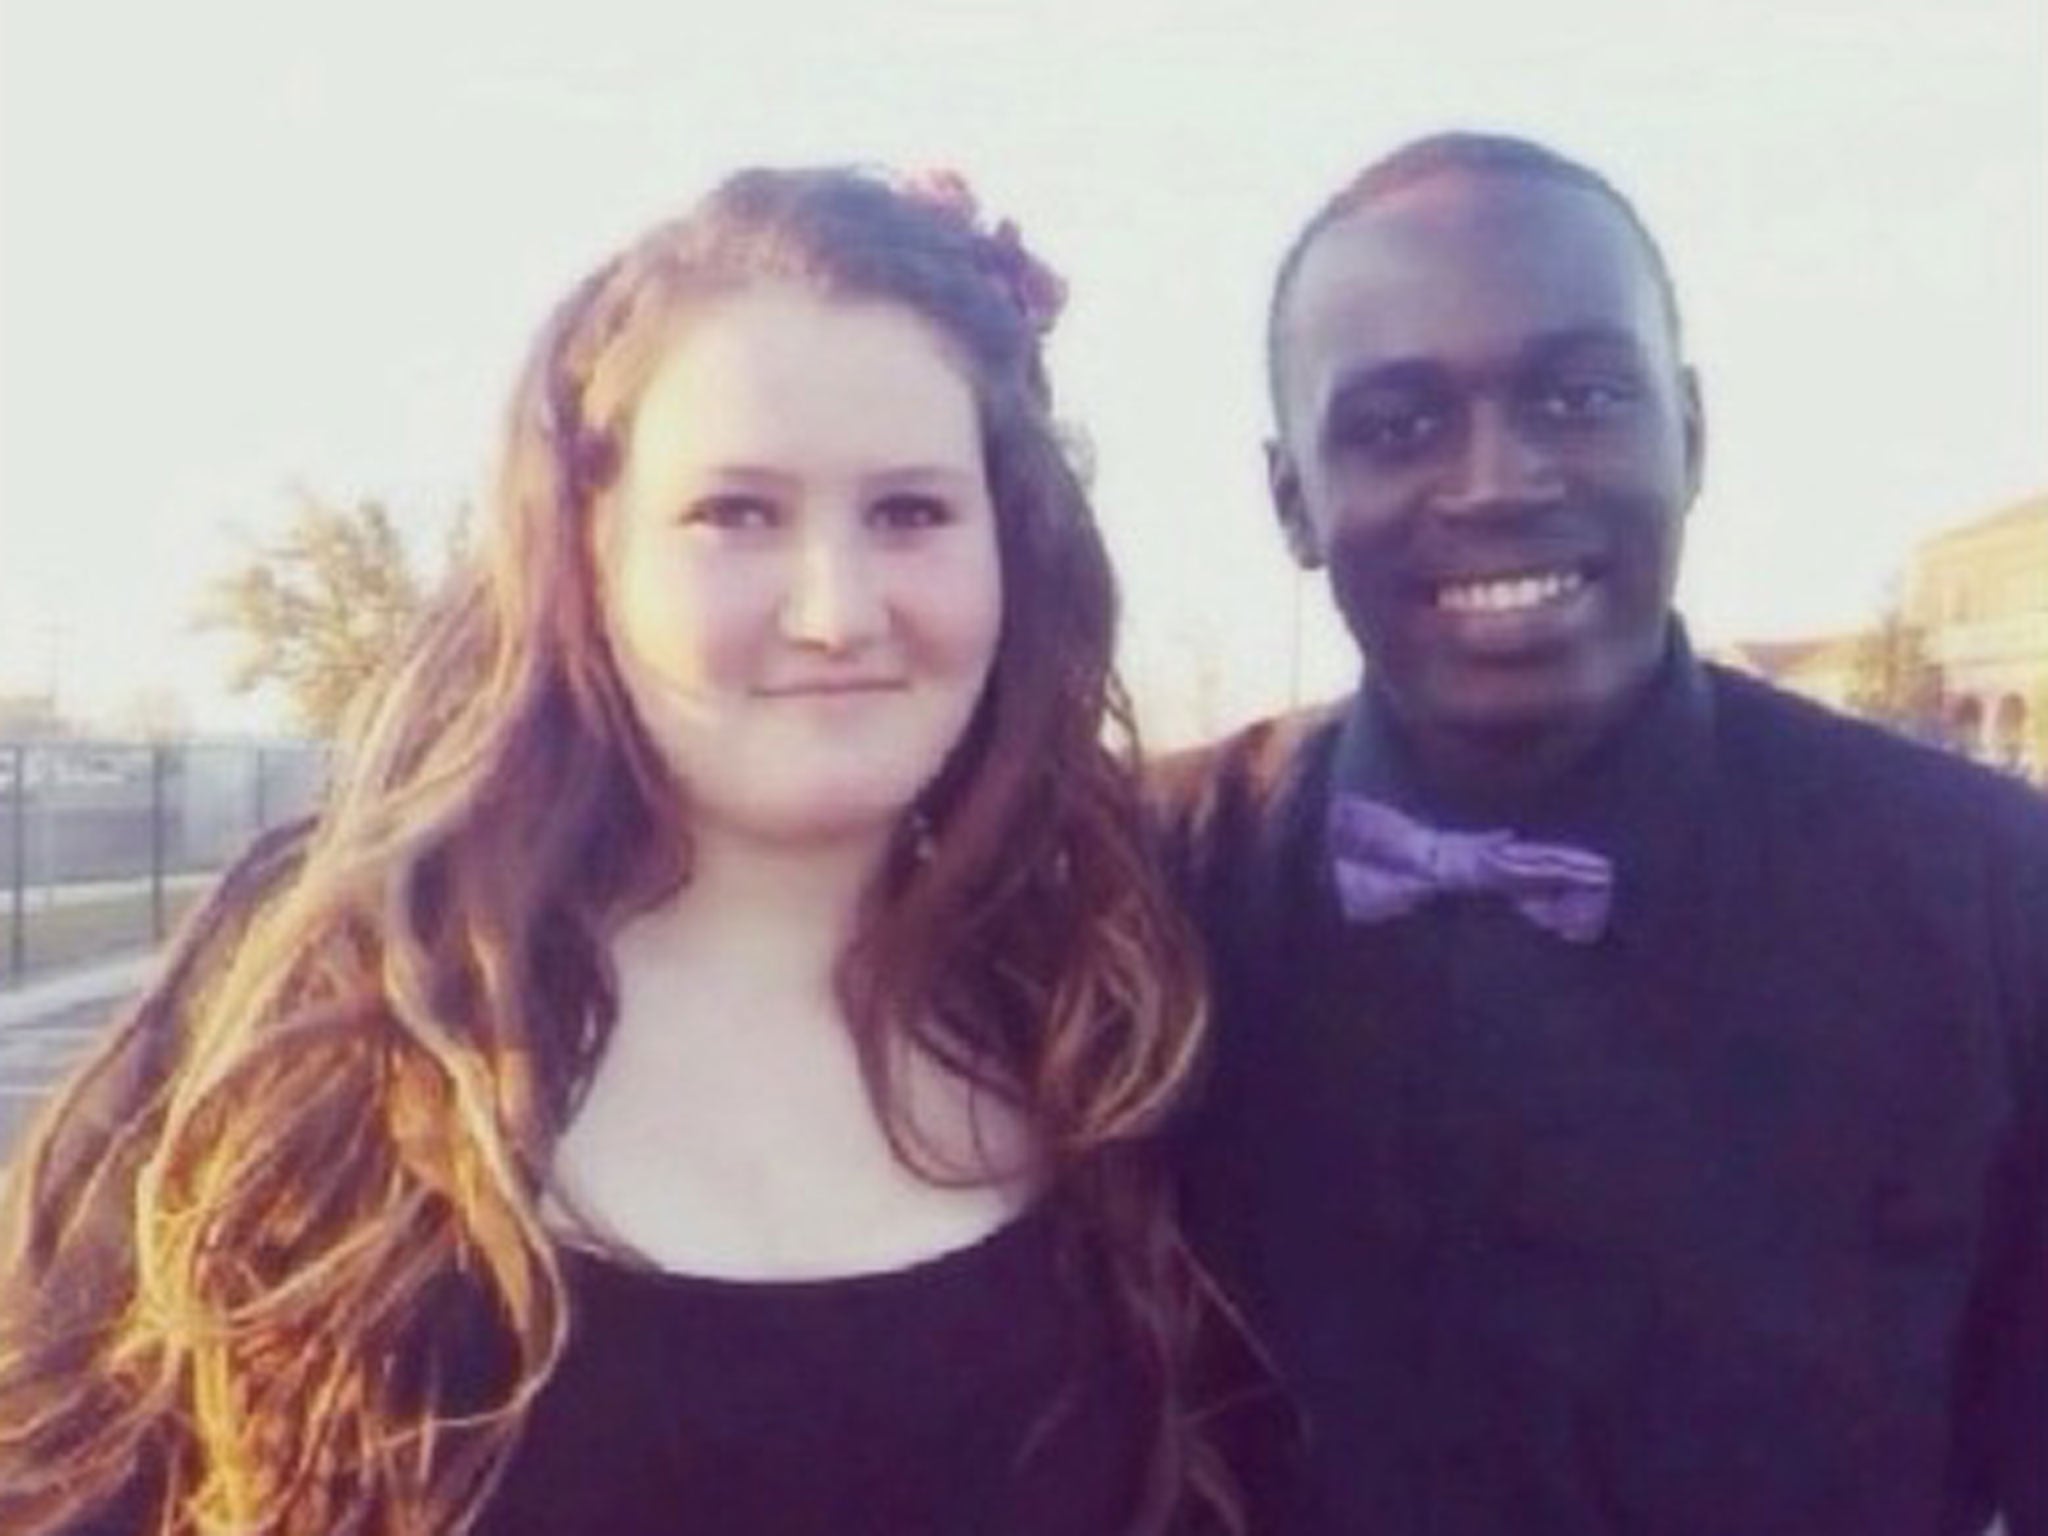 The 16-year-old couple were on their way to a high school dance when the accident happened